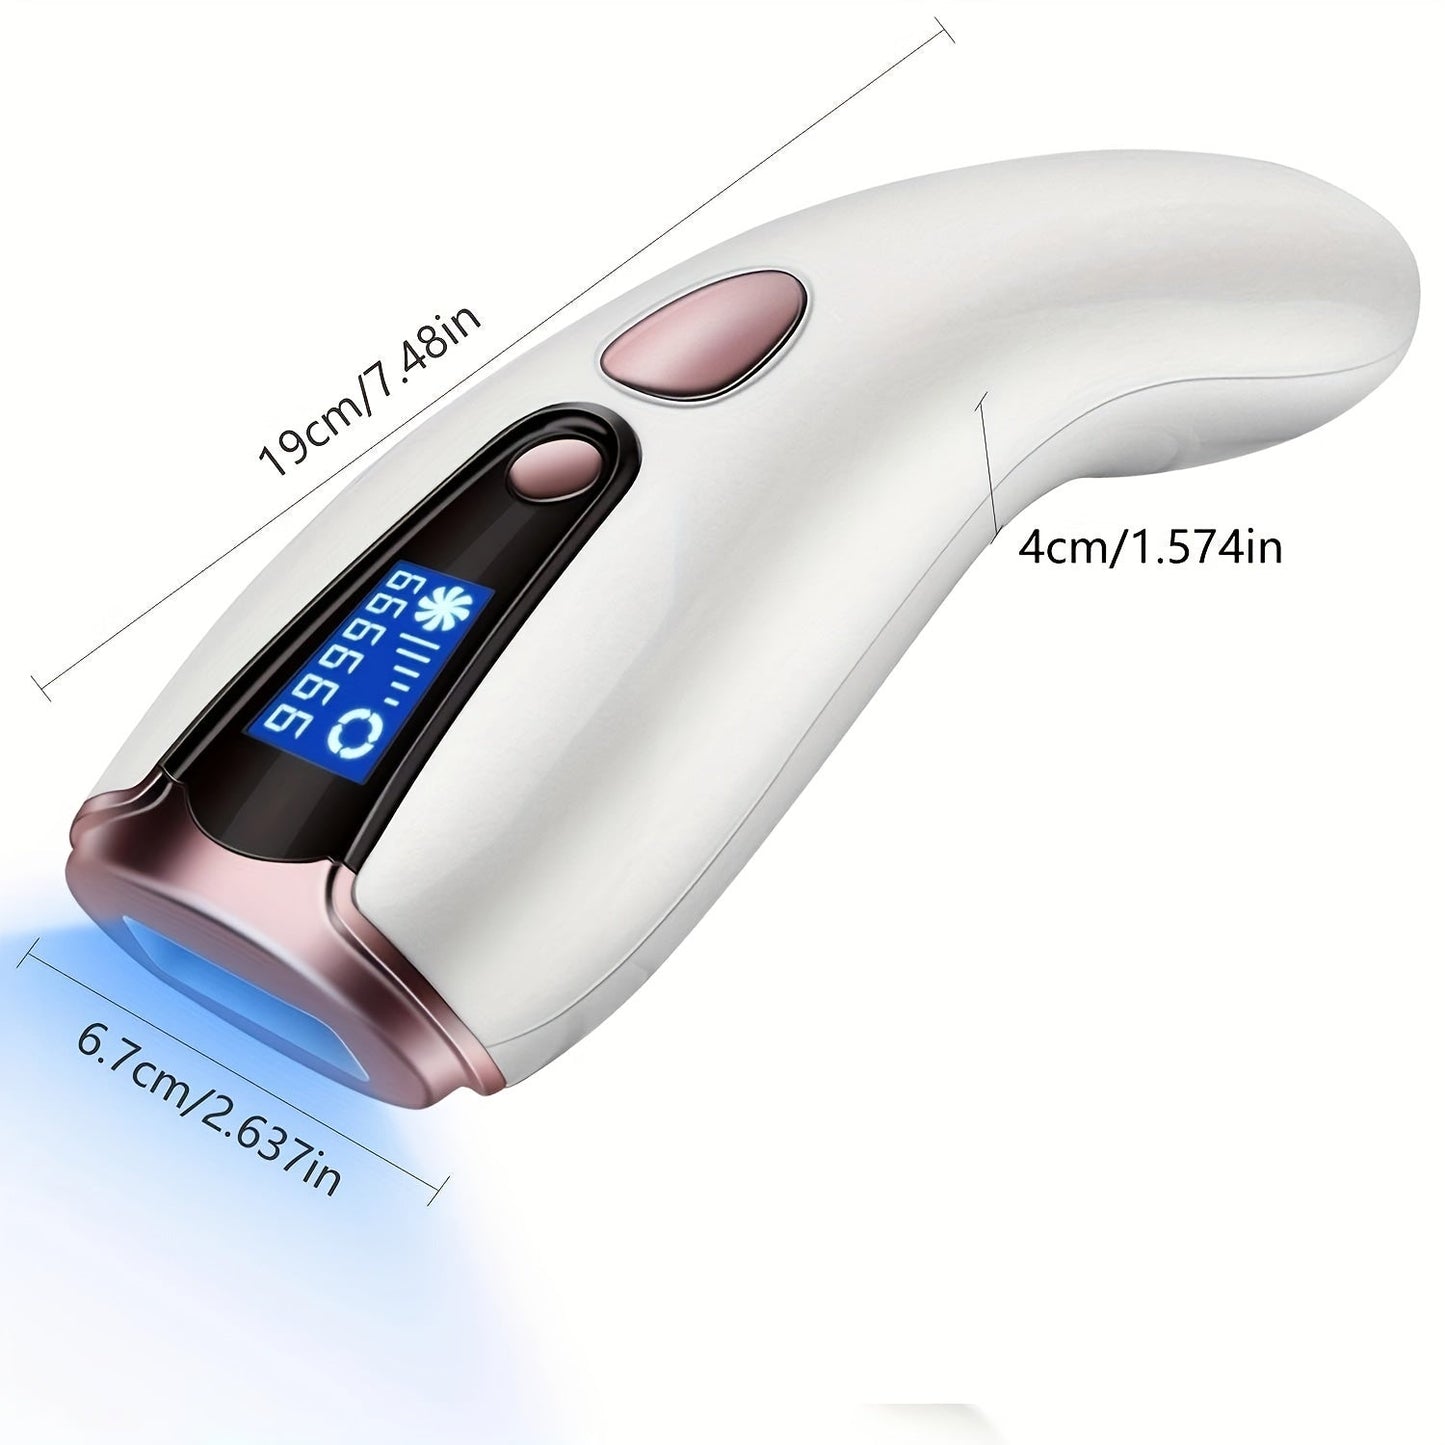 Permanent Painless Hair Removal for Women & Men - Laser IPL Device for Arms, Legs, Bikini & Facial Hair!